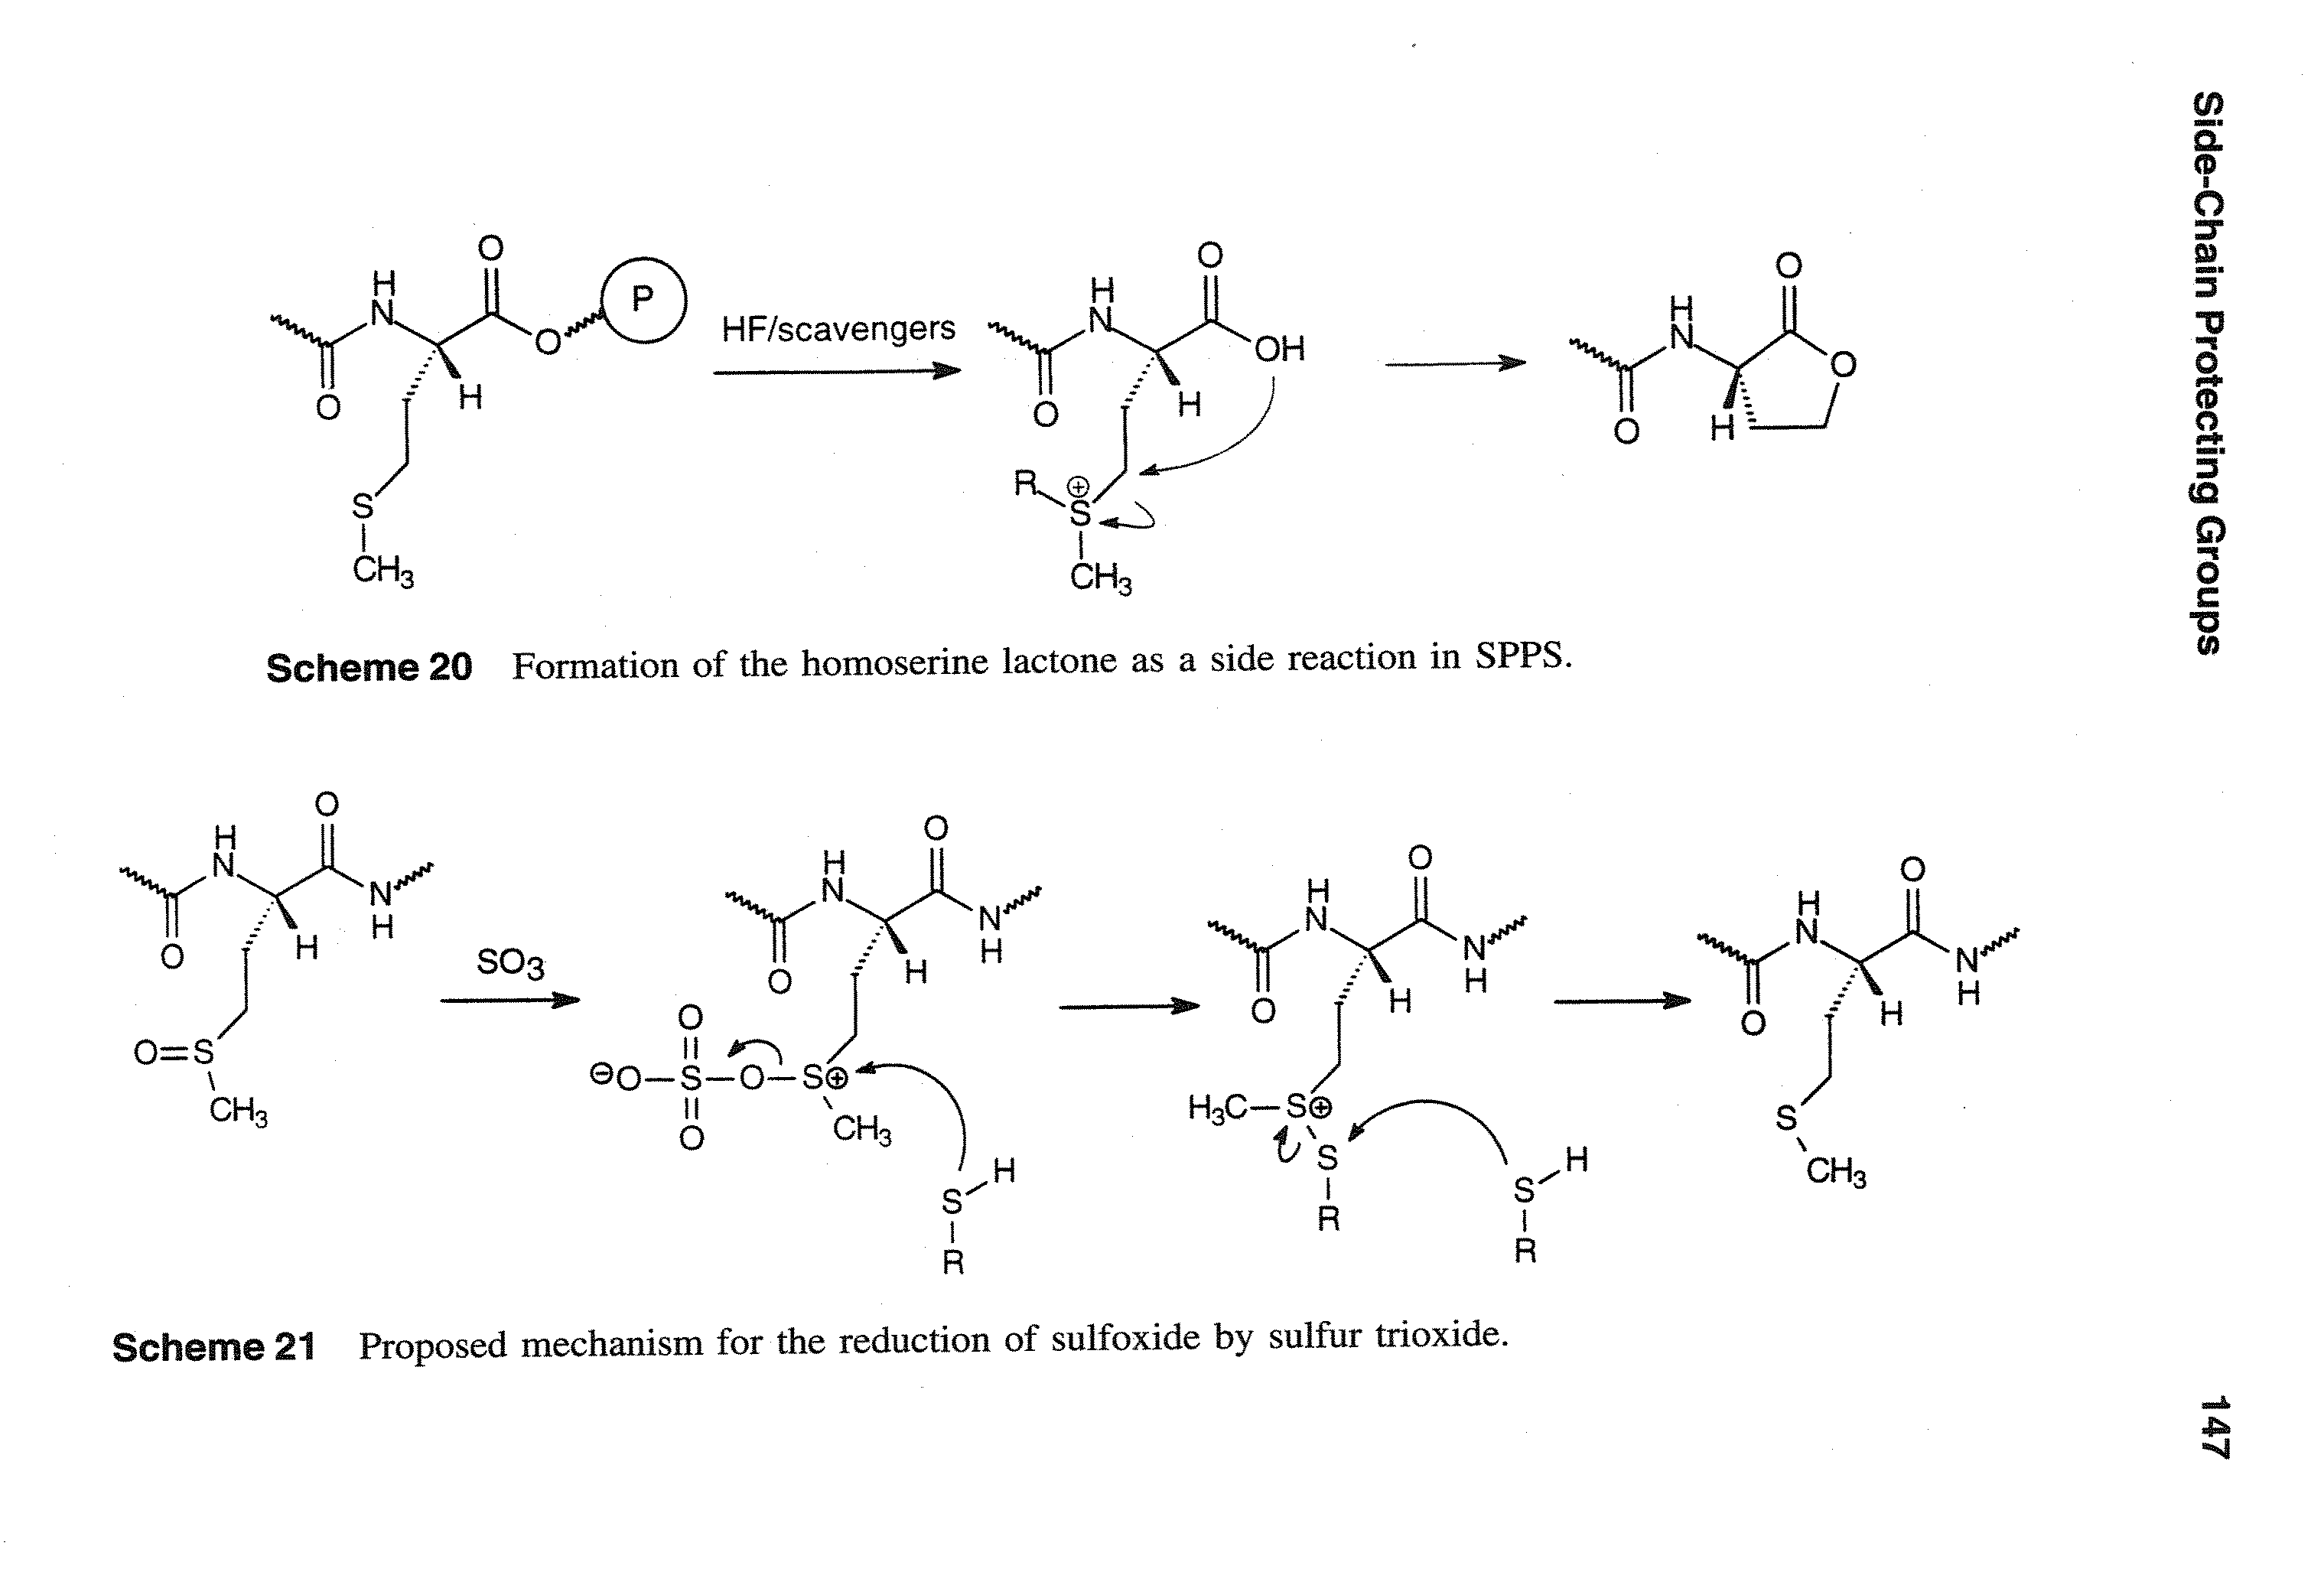 Scheme 20 Formation of the homoserine lactone as a side reaction in SPPS.